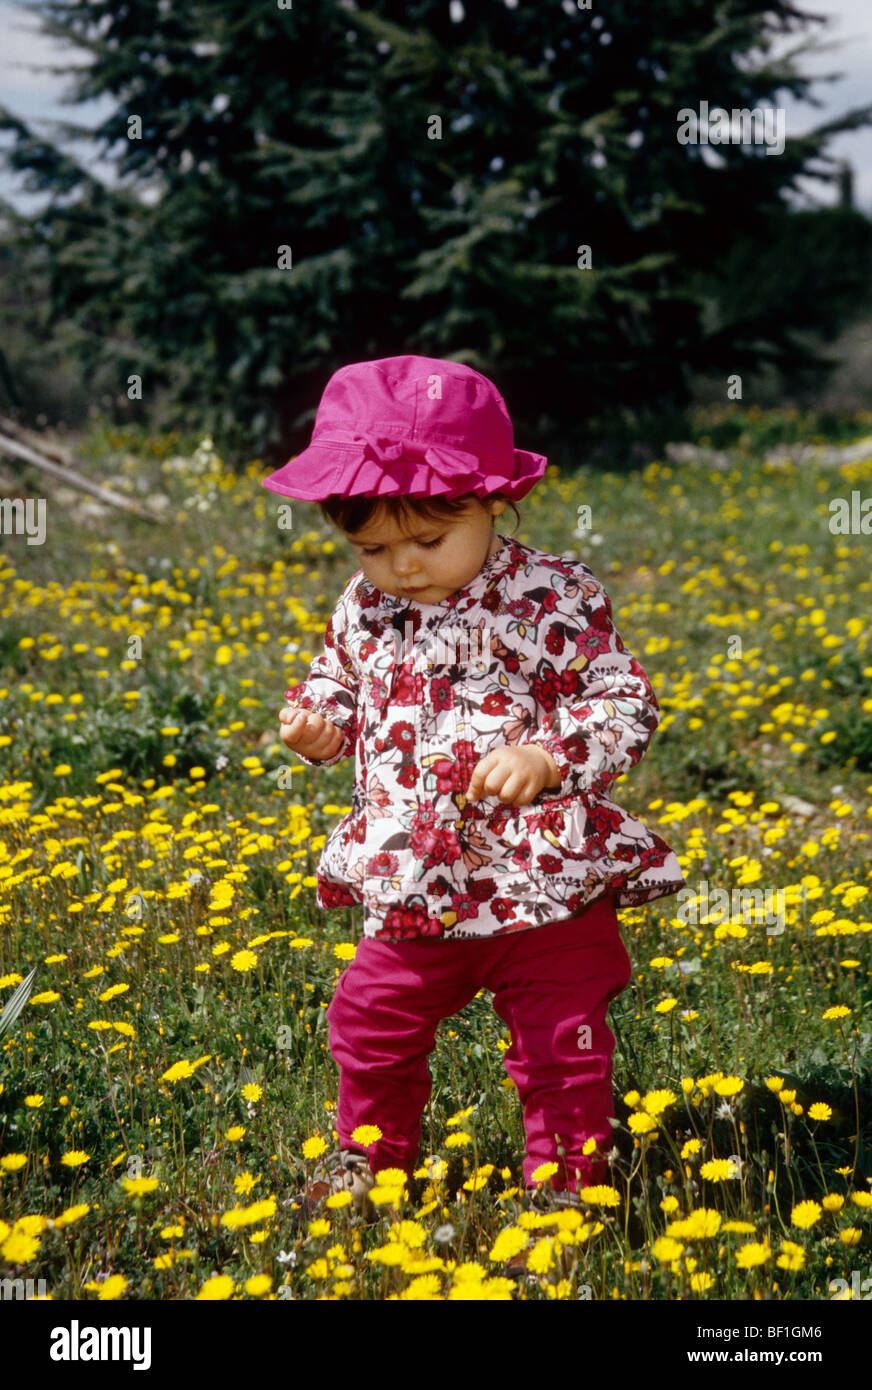 Faustine 16 months old playing in a yellow wild flower field Stock Photo